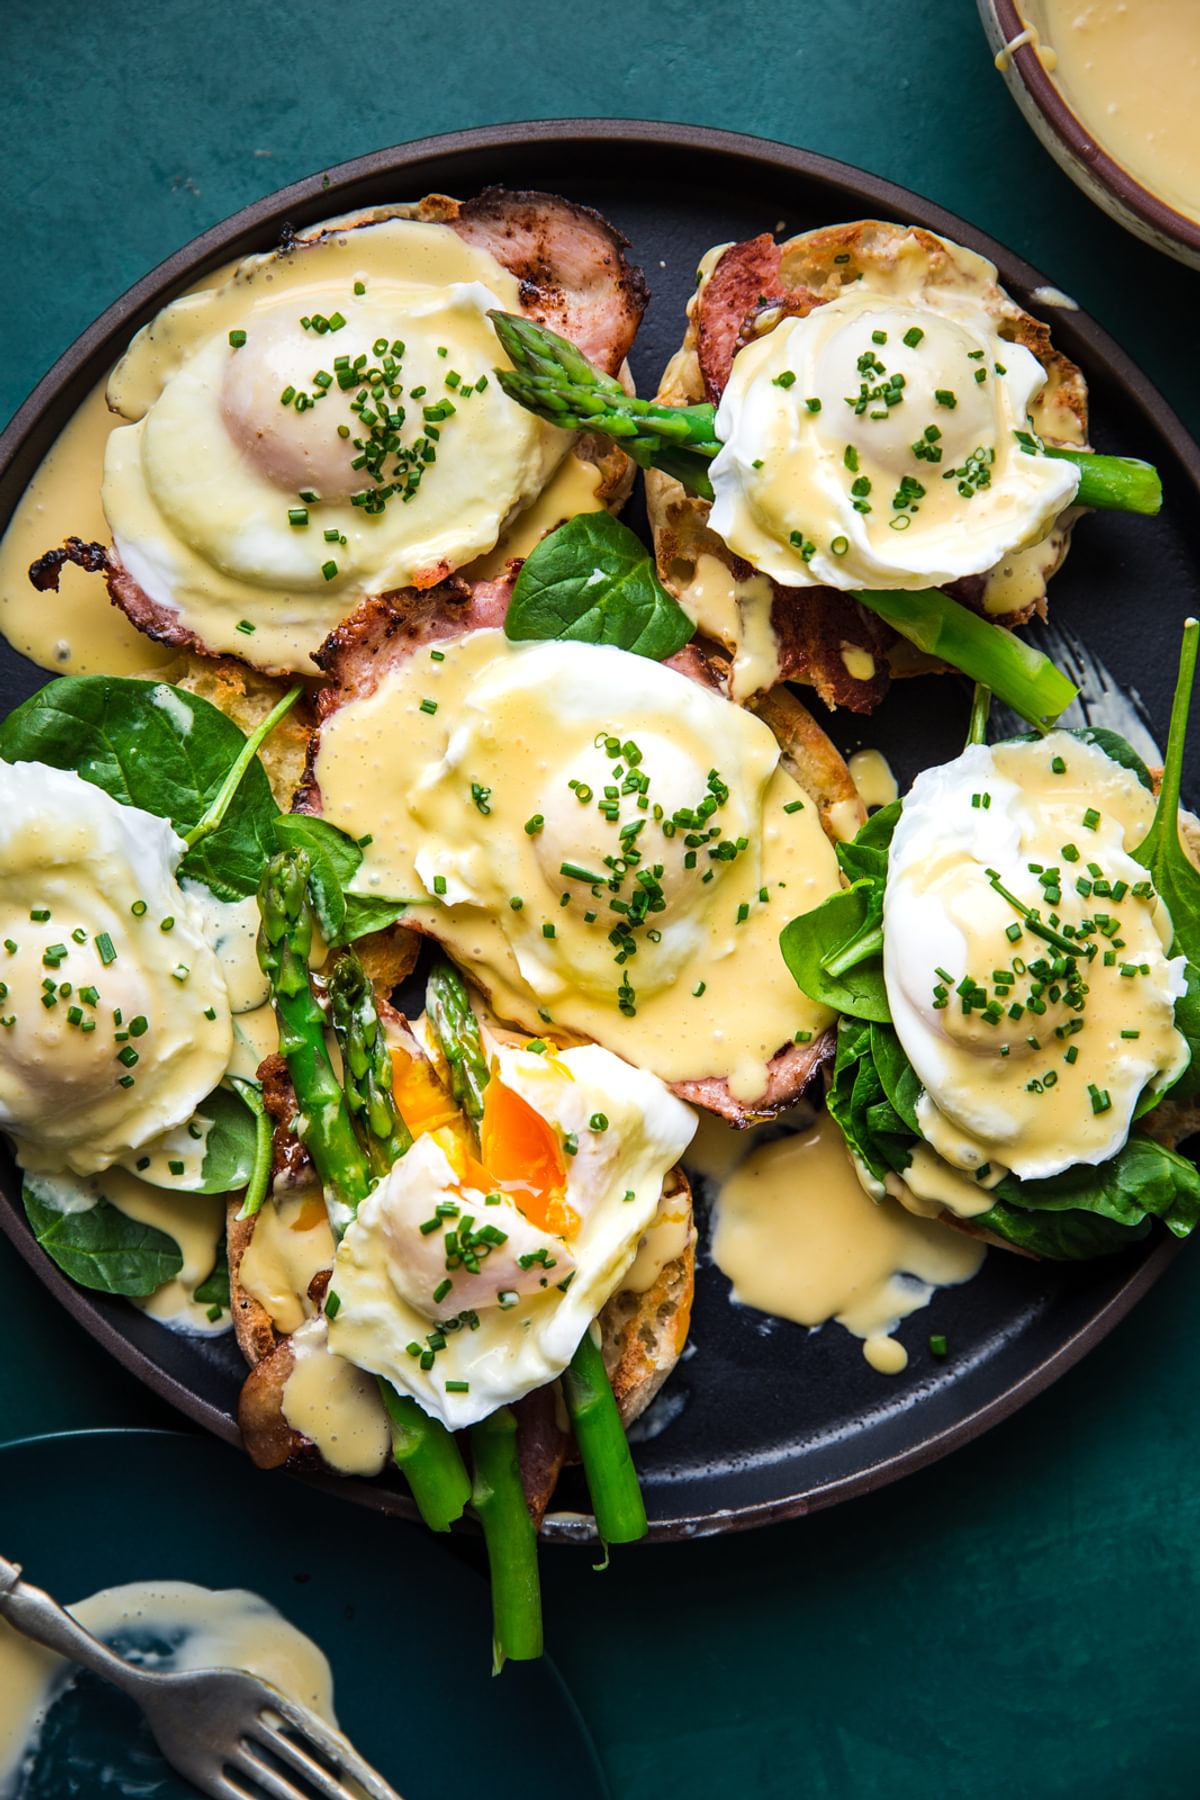 eggs benedict with hollandaise sauce on English muffins with ham and asparagus and poached eggs